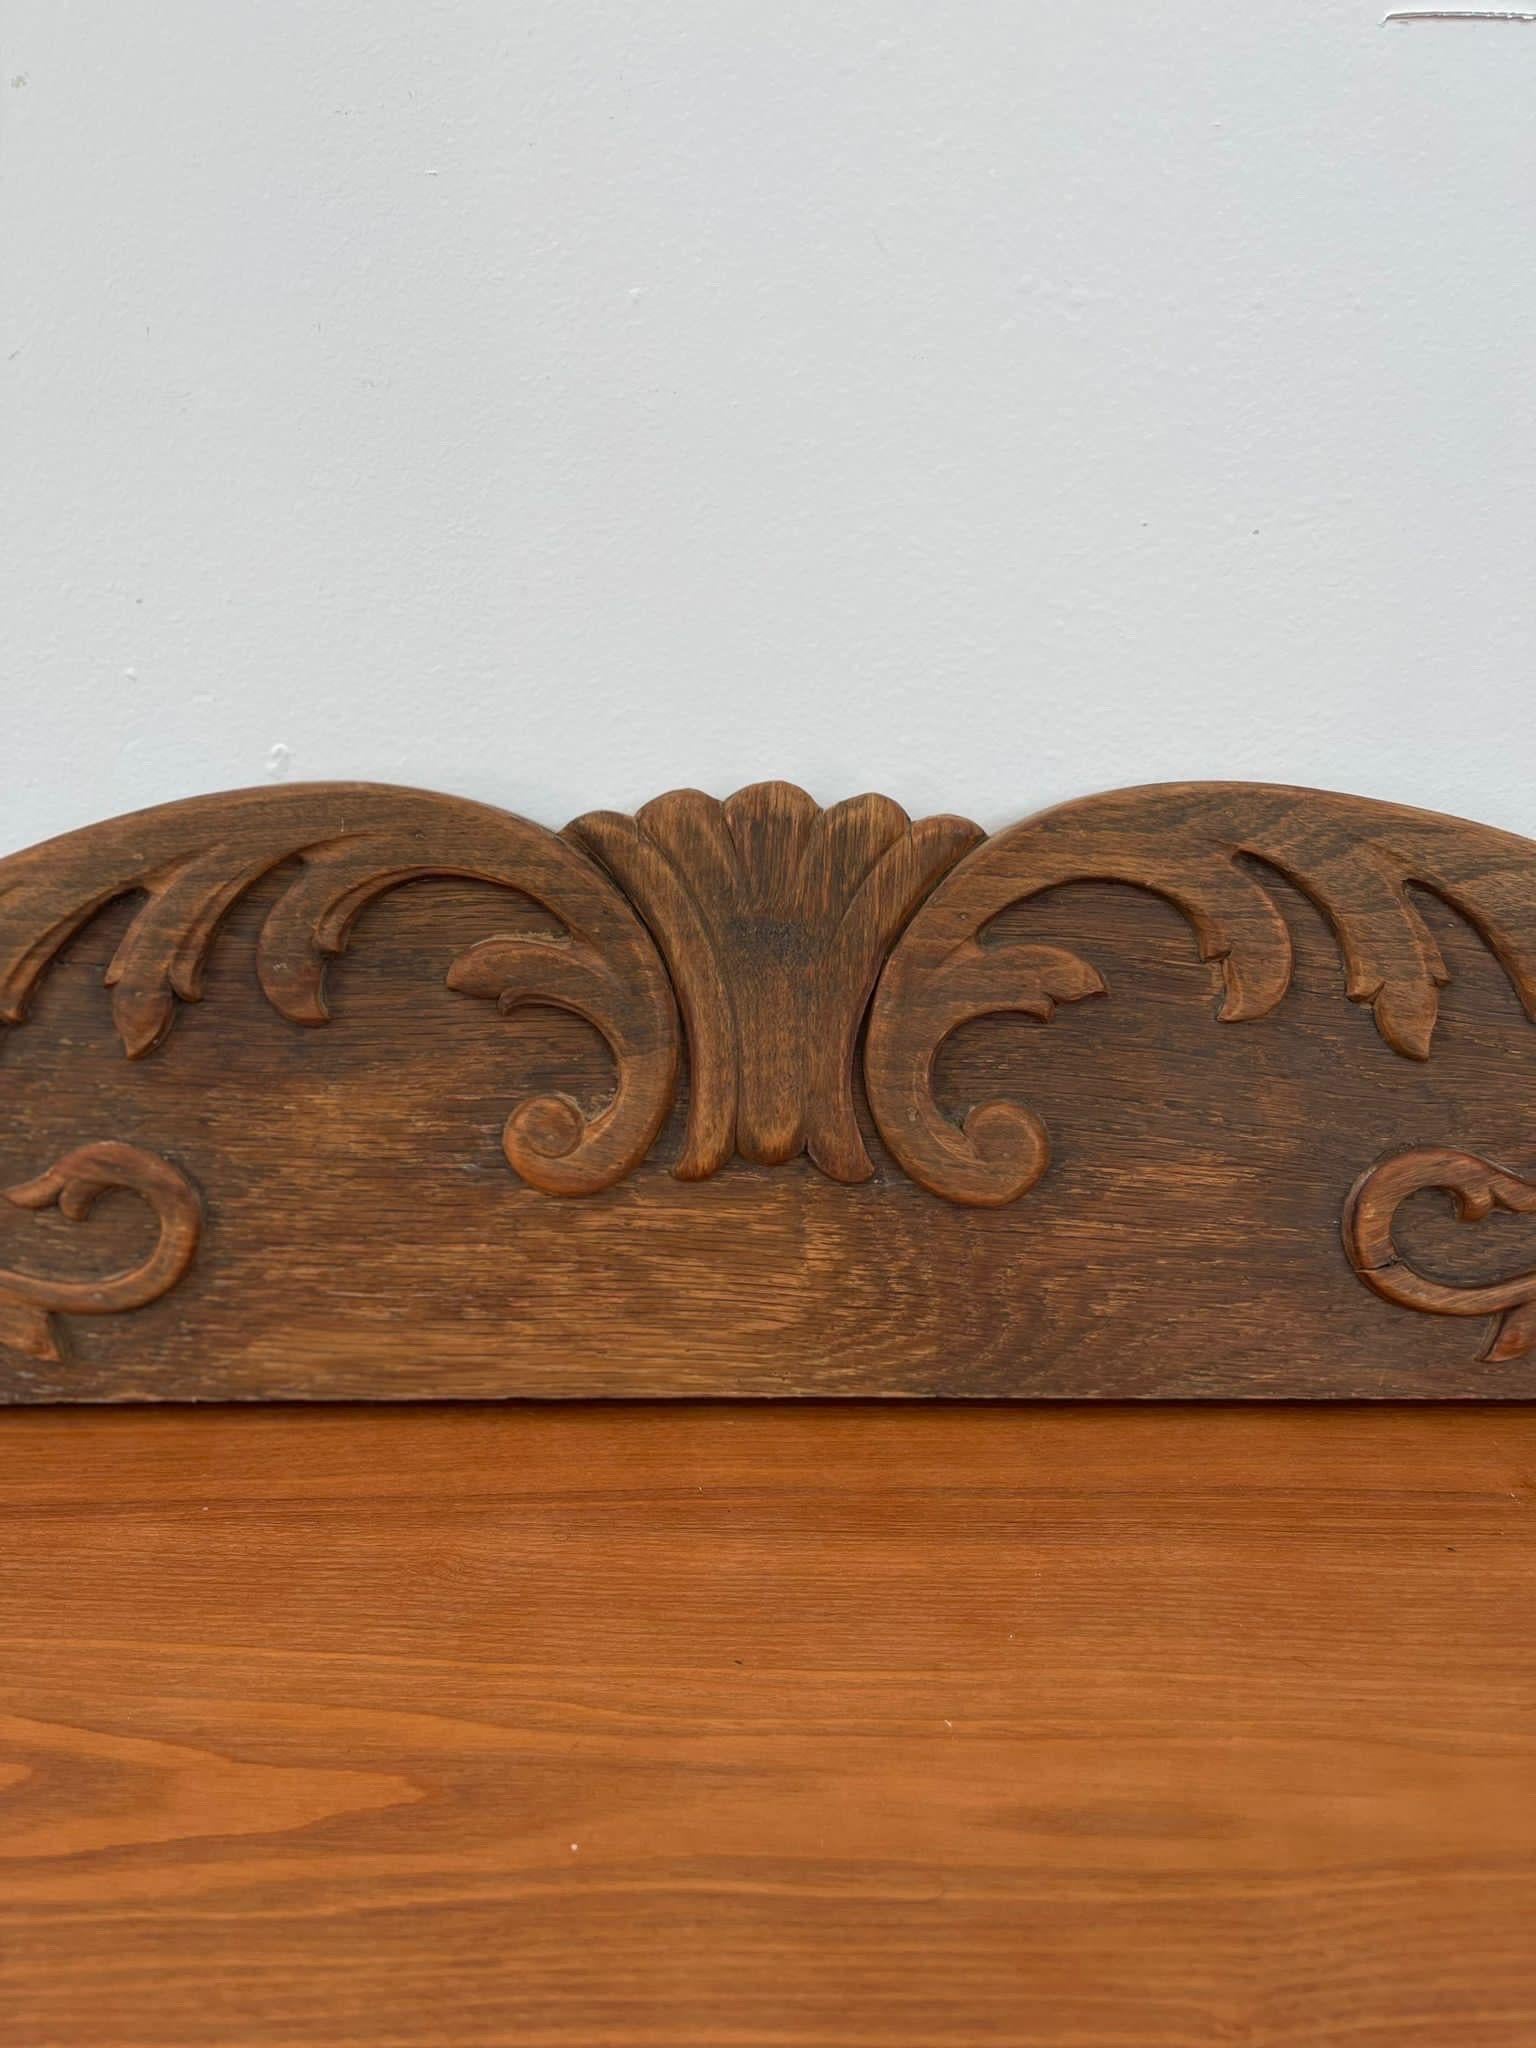 Vintage Architectural Salvage Decorative Caved Wood Trim In Good Condition For Sale In Seattle, WA